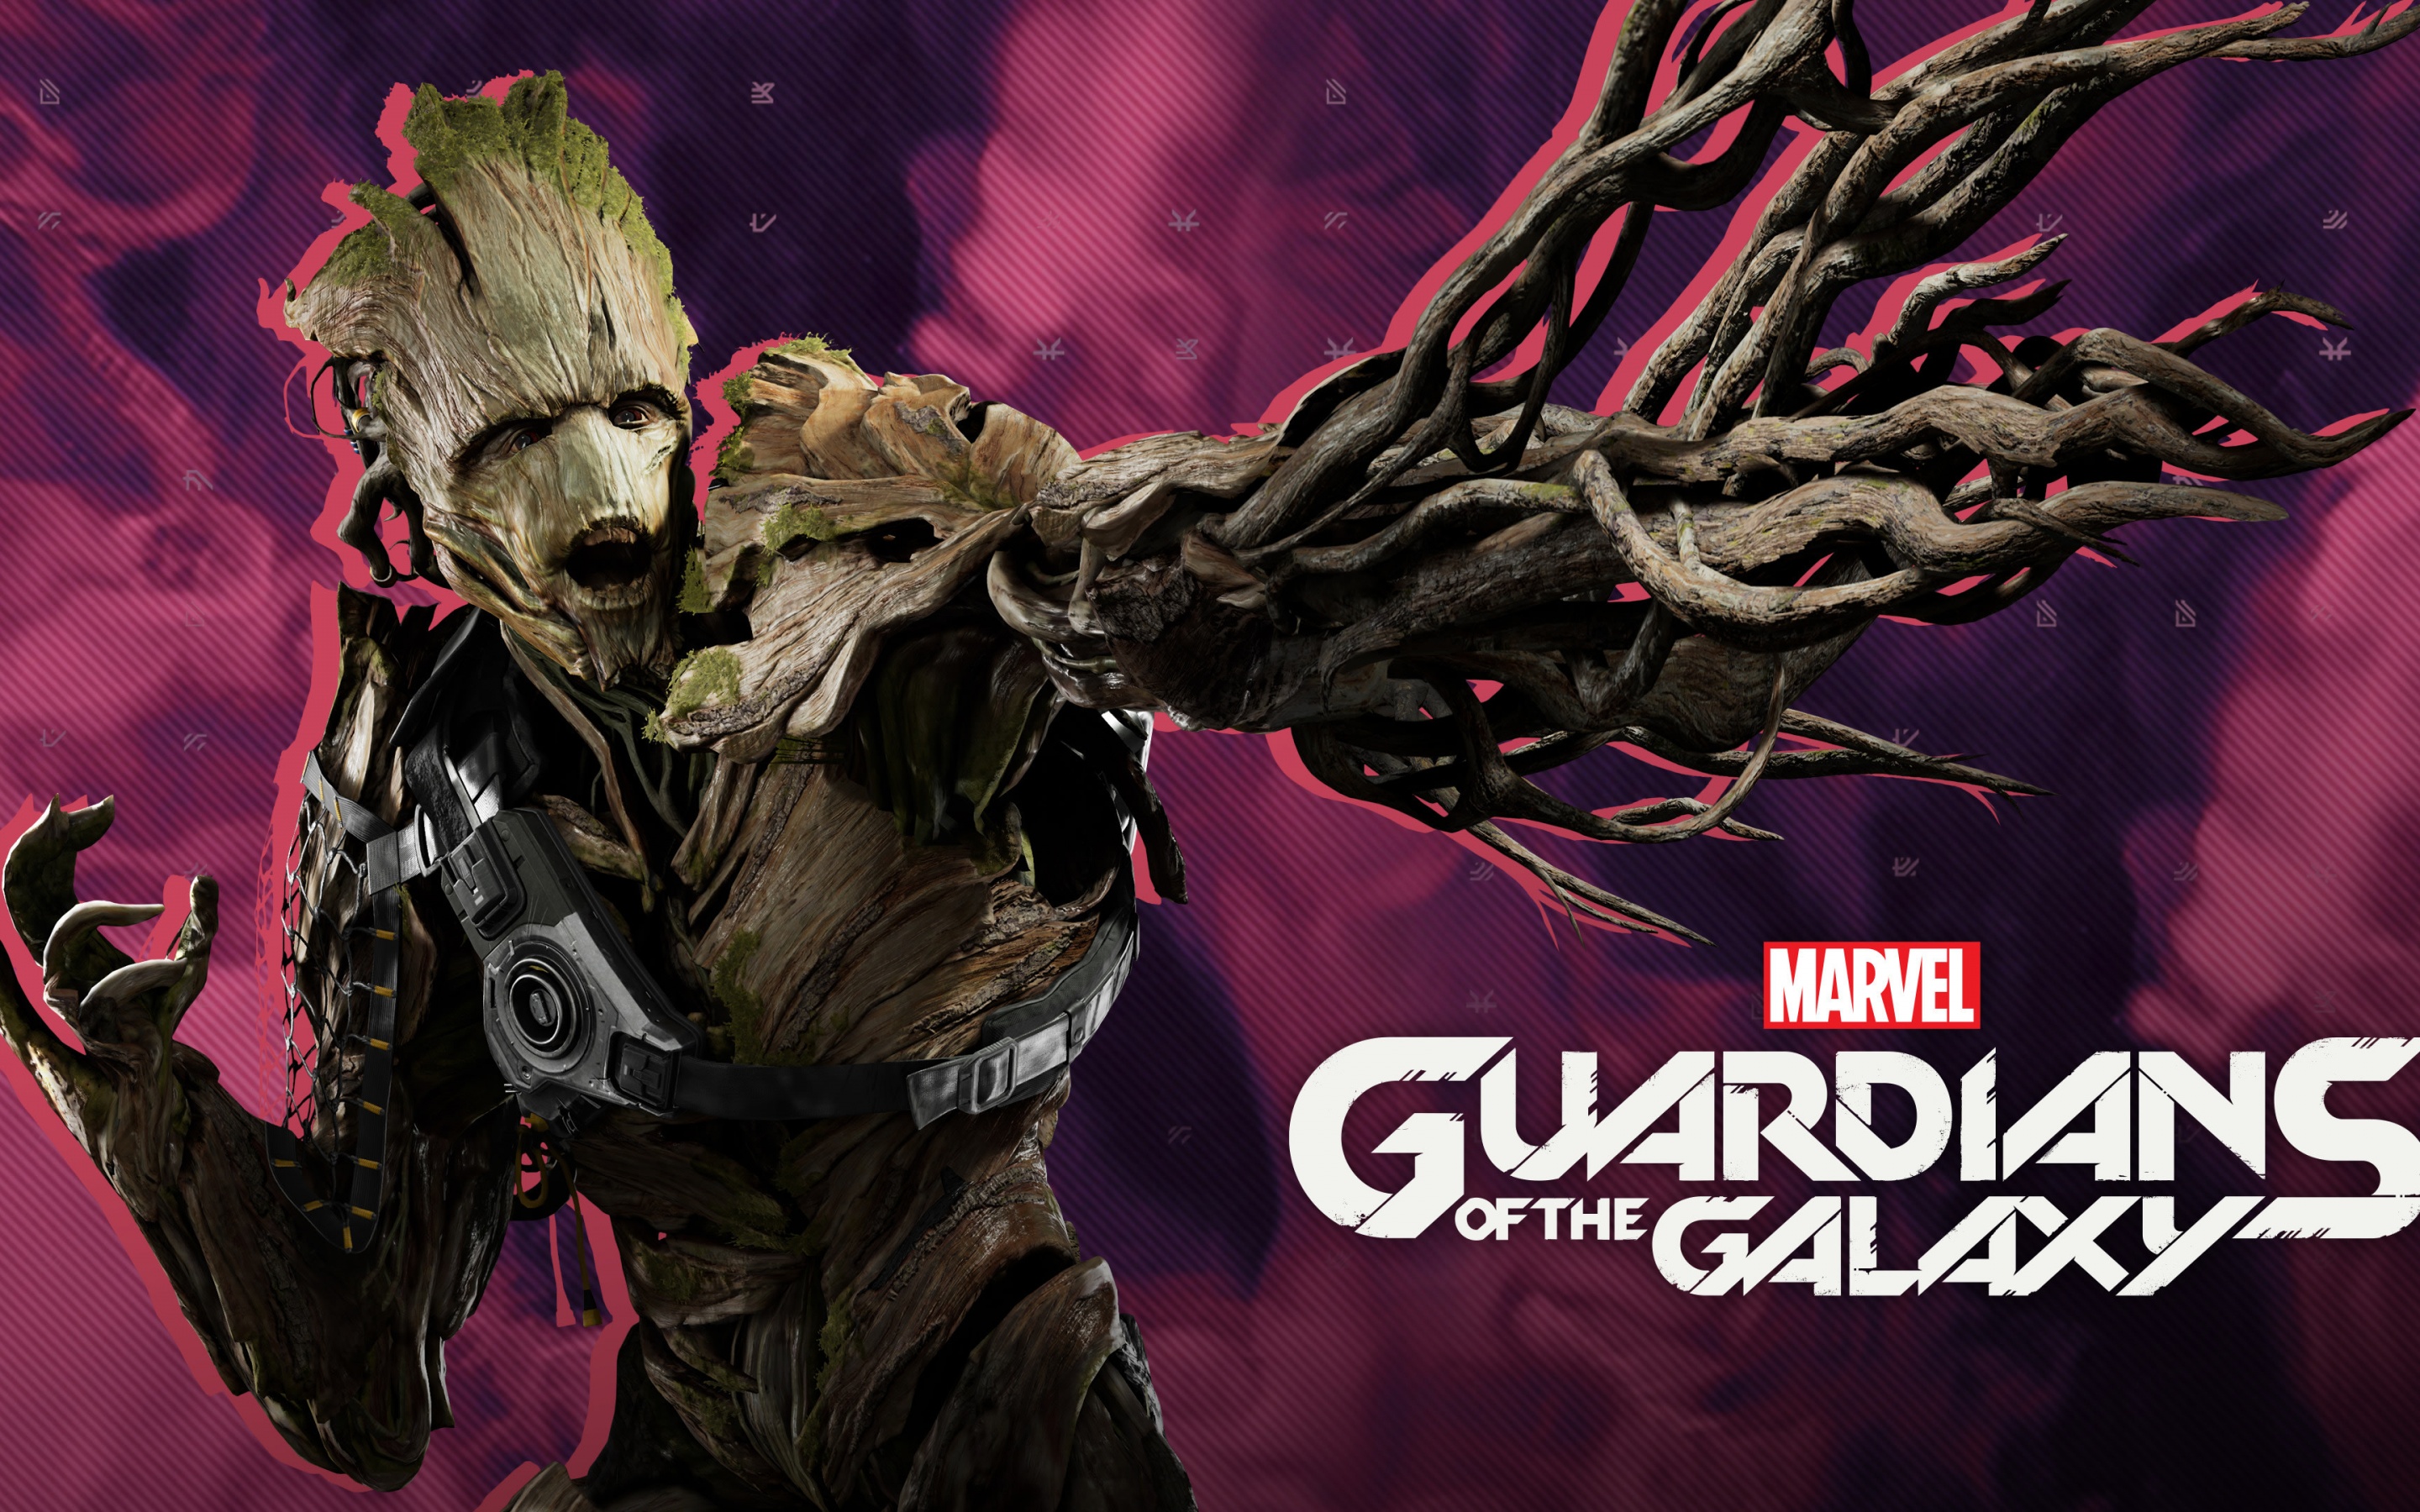 Marvel's Guardians of the Galaxy Wallpaper 4K, Groot, 2021 Games, Games,  #6580